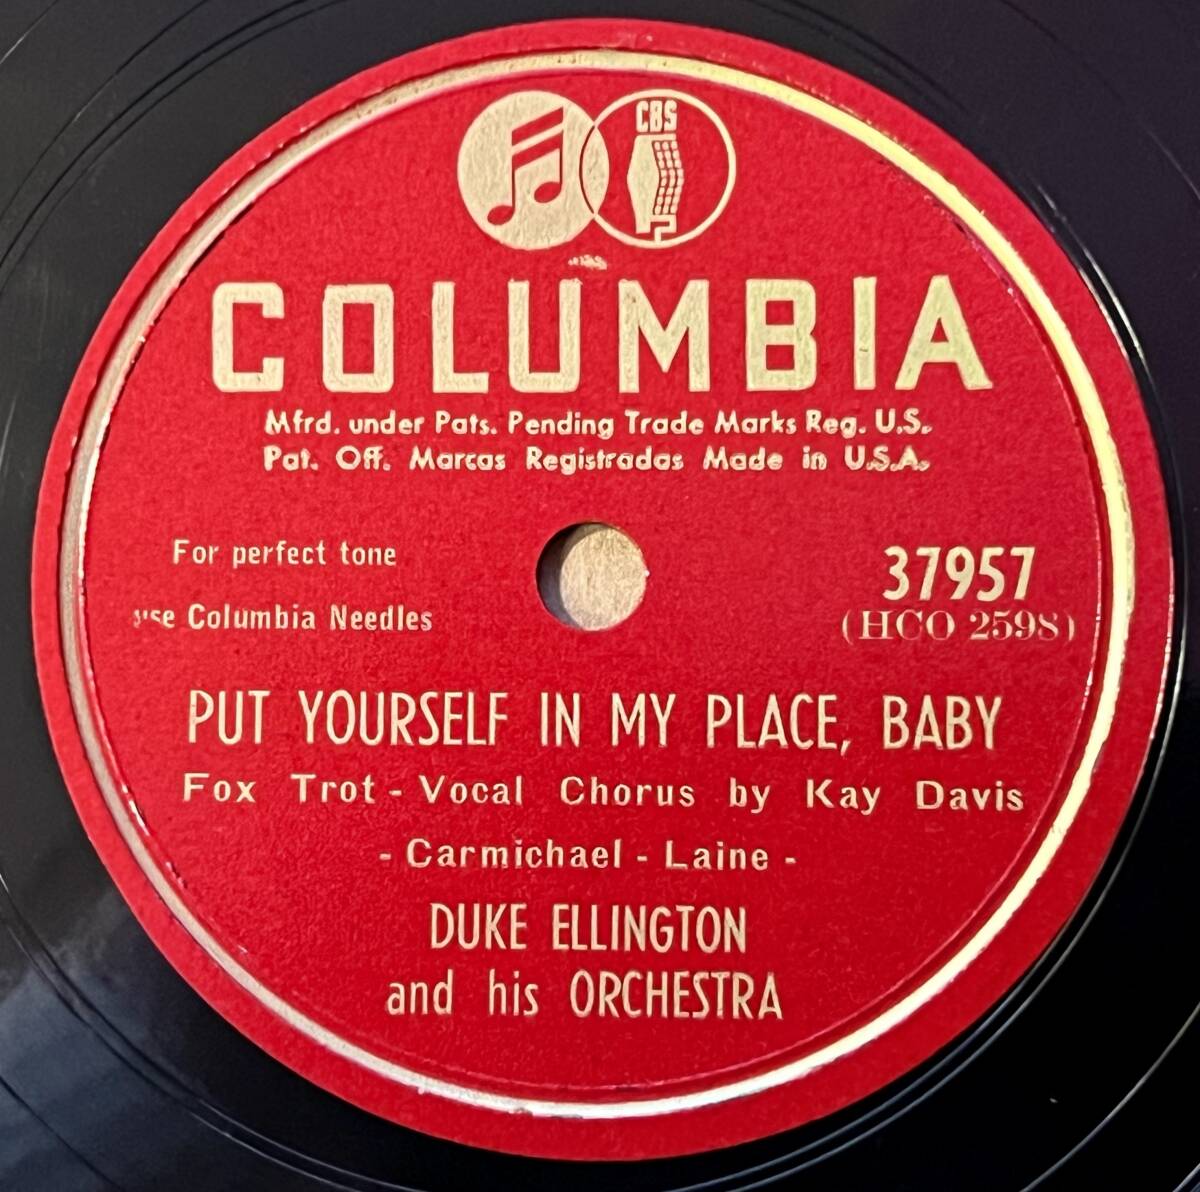 DUKE ELLINGTON AND HIS ORCH. COLUMBIA The Wildest Gal In Town/ Put Yourself In My Place, Baby オリジナルプレス_画像1